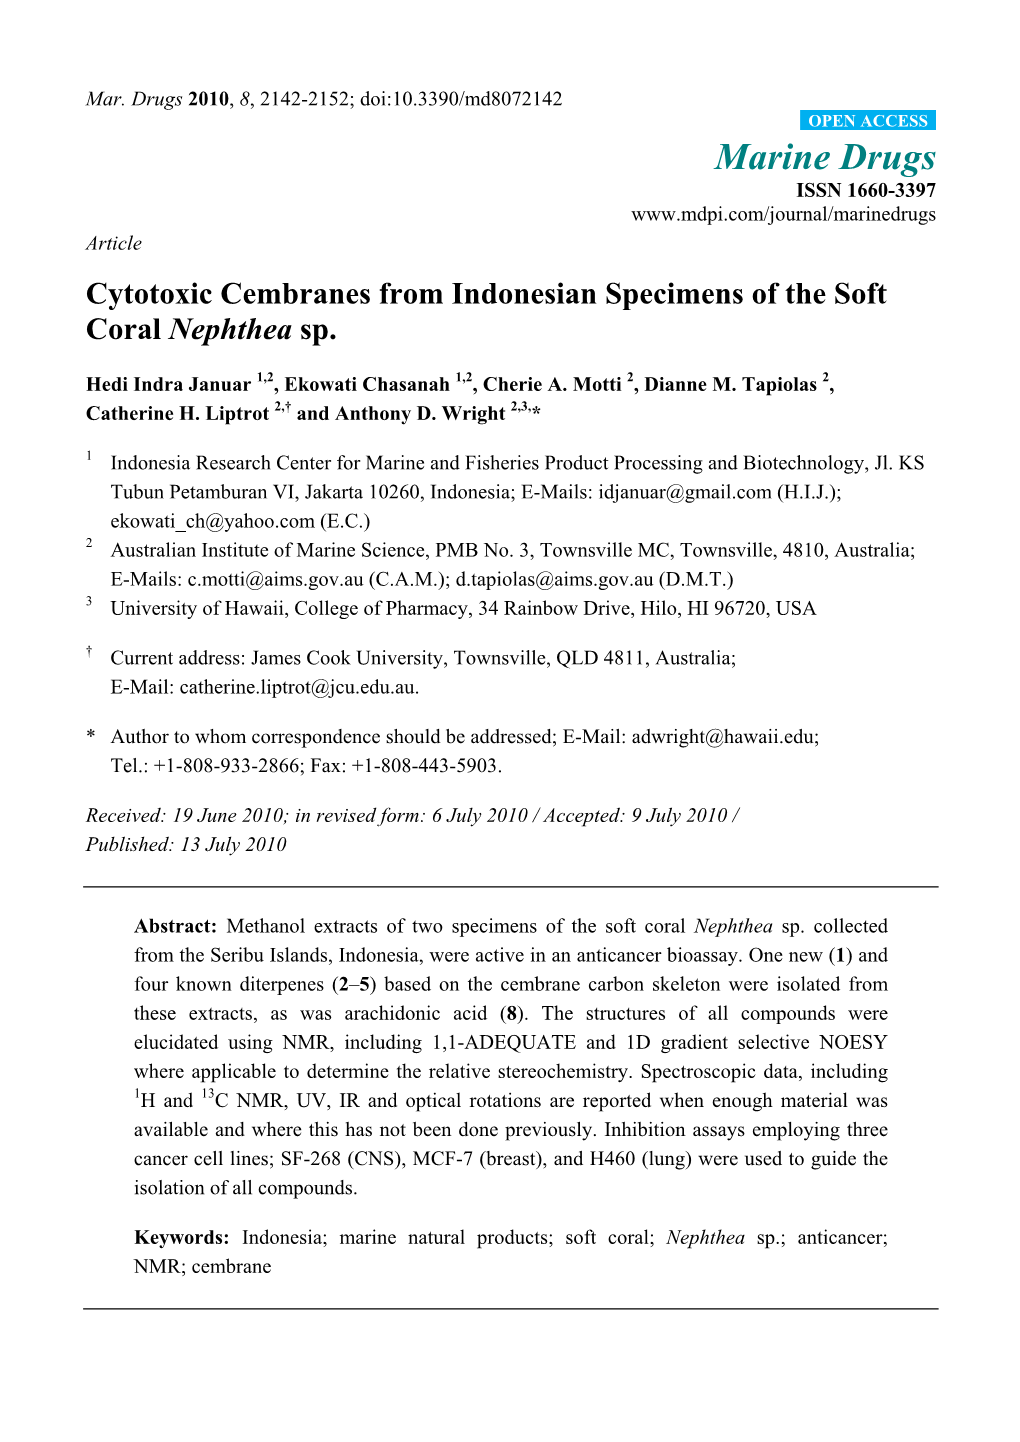 Cytotoxic Cembranes from Indonesian Specimens of the Soft Coral Nephthea Sp